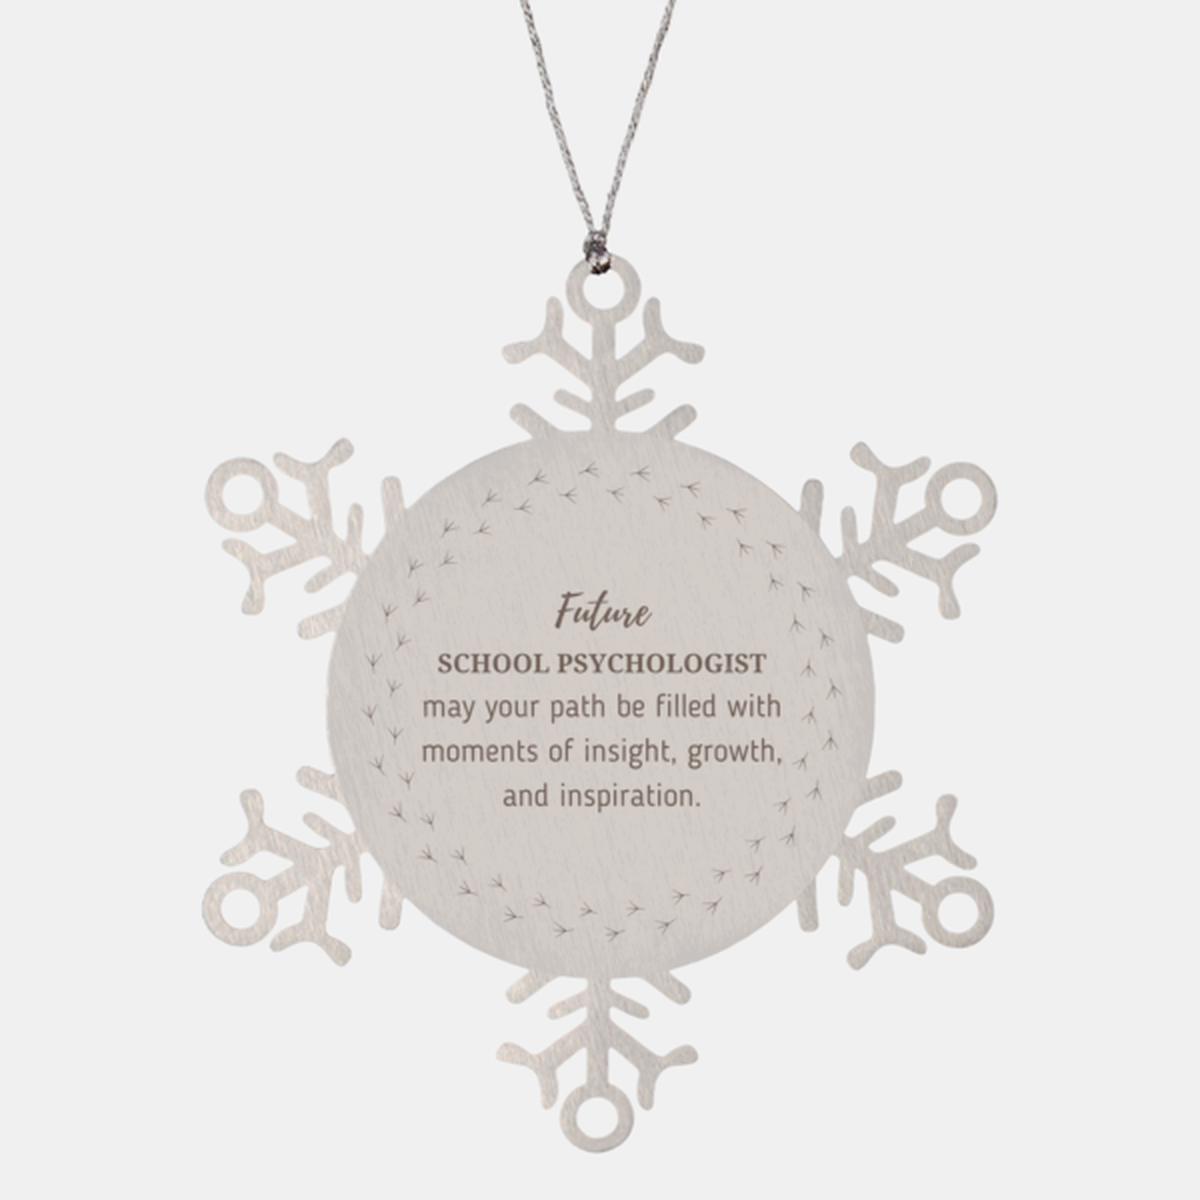 Future School Psychologist Gifts, May your path be filled with moments of insight, Graduation Gifts for New School Psychologist, Christmas Unique Snowflake Ornament For Men, Women, Friends